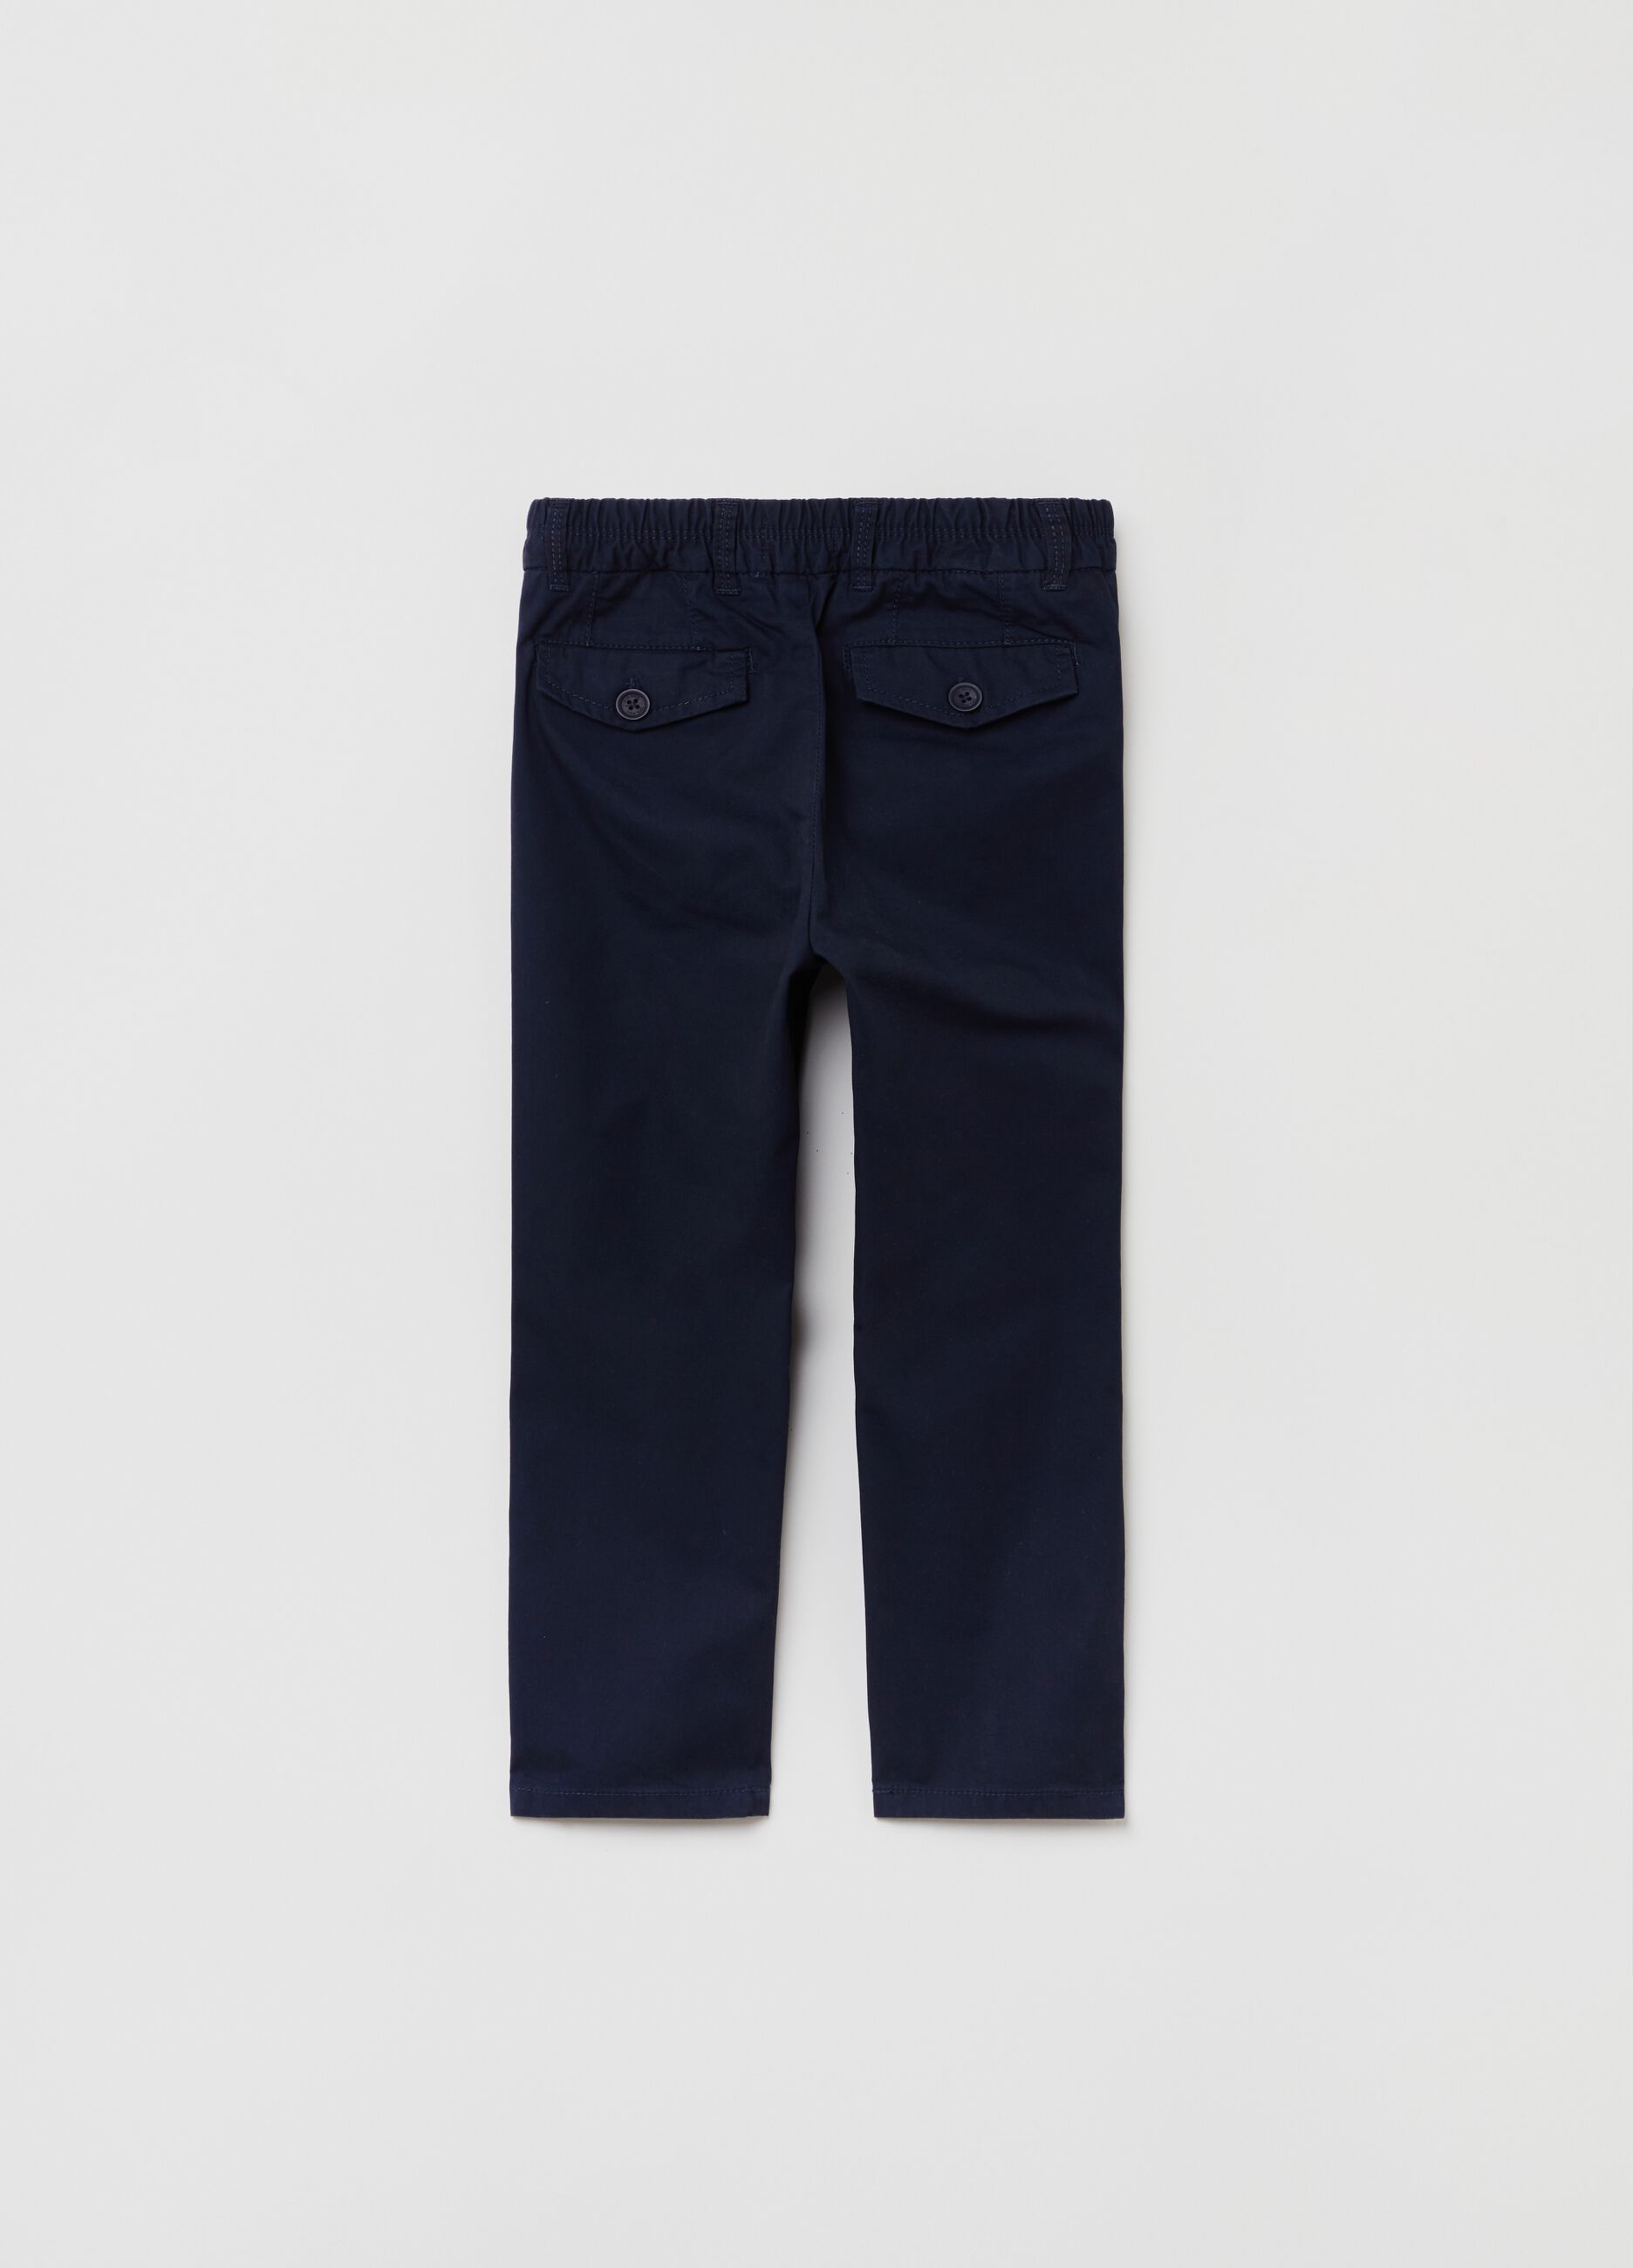 Cotton trousers with drawstring